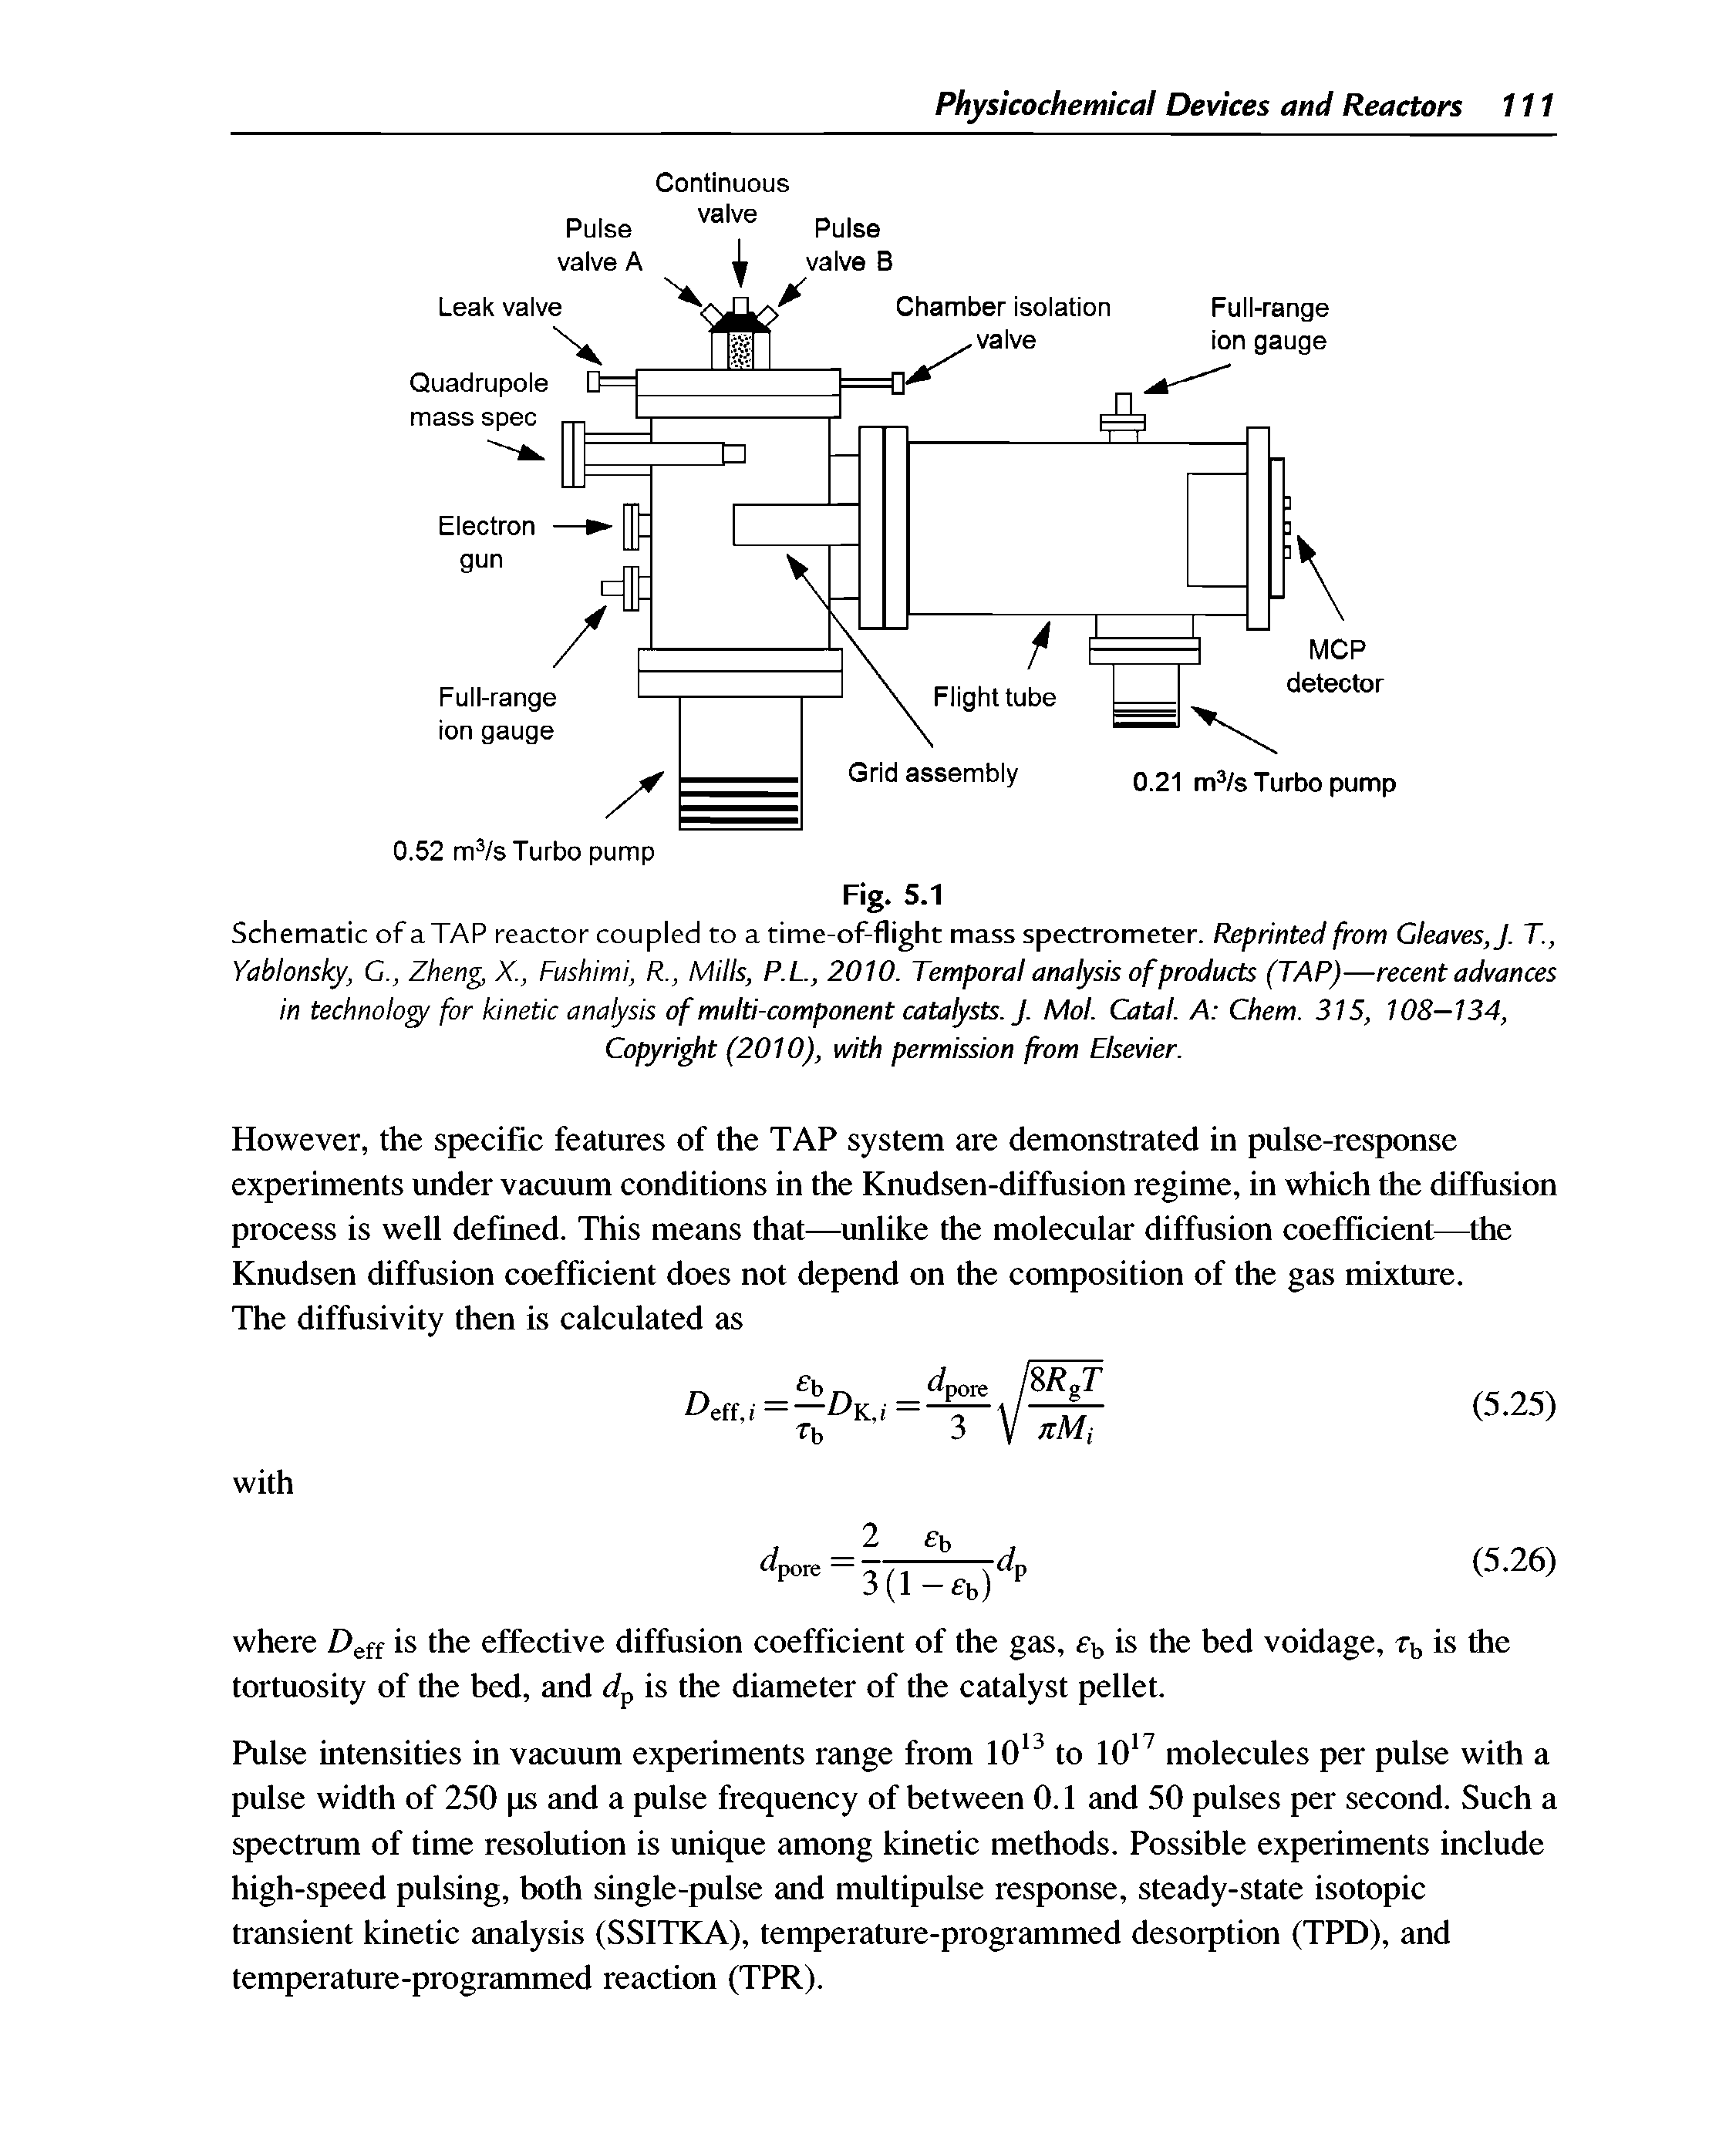 Schematic of aTAP reactor coupled to a time-of-flight mass spectrometer. Reprinted from Cleaves,]. T., Yabhnsky, G., Zheng, X., Fushimi, R., Mills, P.L, 2010. Temporal analysis of products (TAP)—recent advances in technology for kinetic analysis of multi-component catalysts. J. Mol. Catal. A Chem. 315, 108—134, Copyrigfit (2010), with permission from Elsevier.